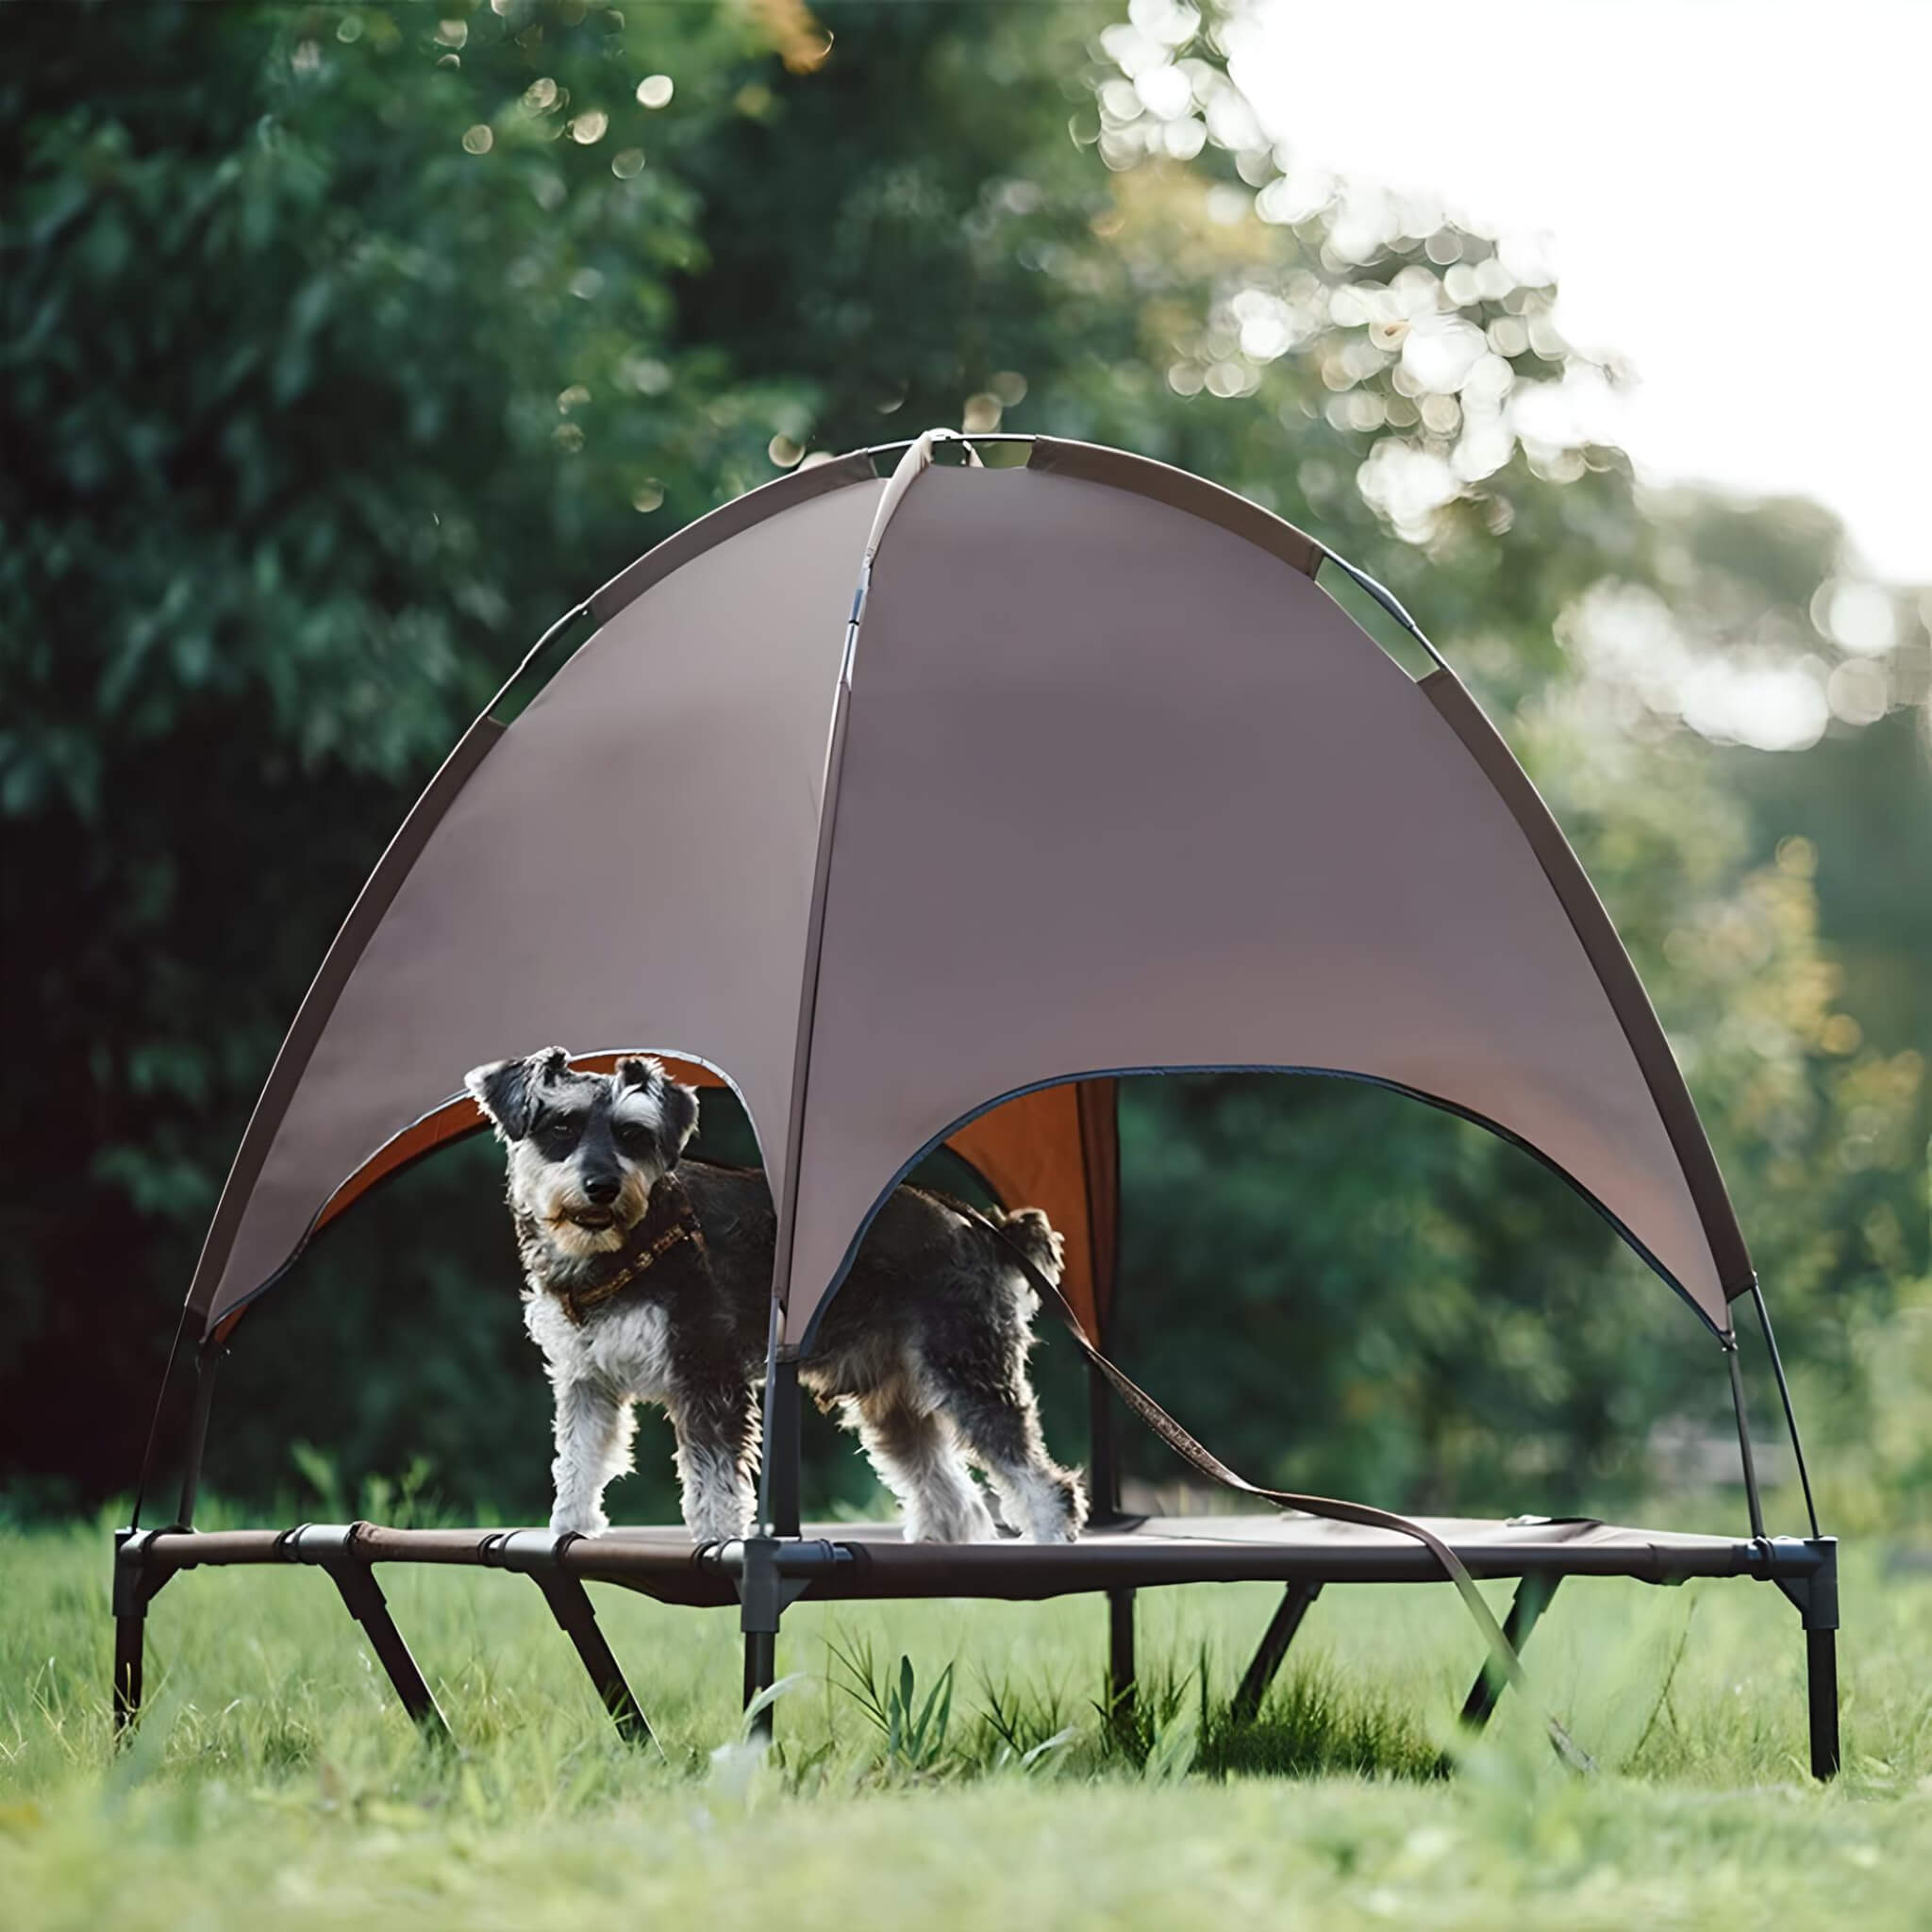 dog-cot-with-canopy-dog-standing-in-hammock